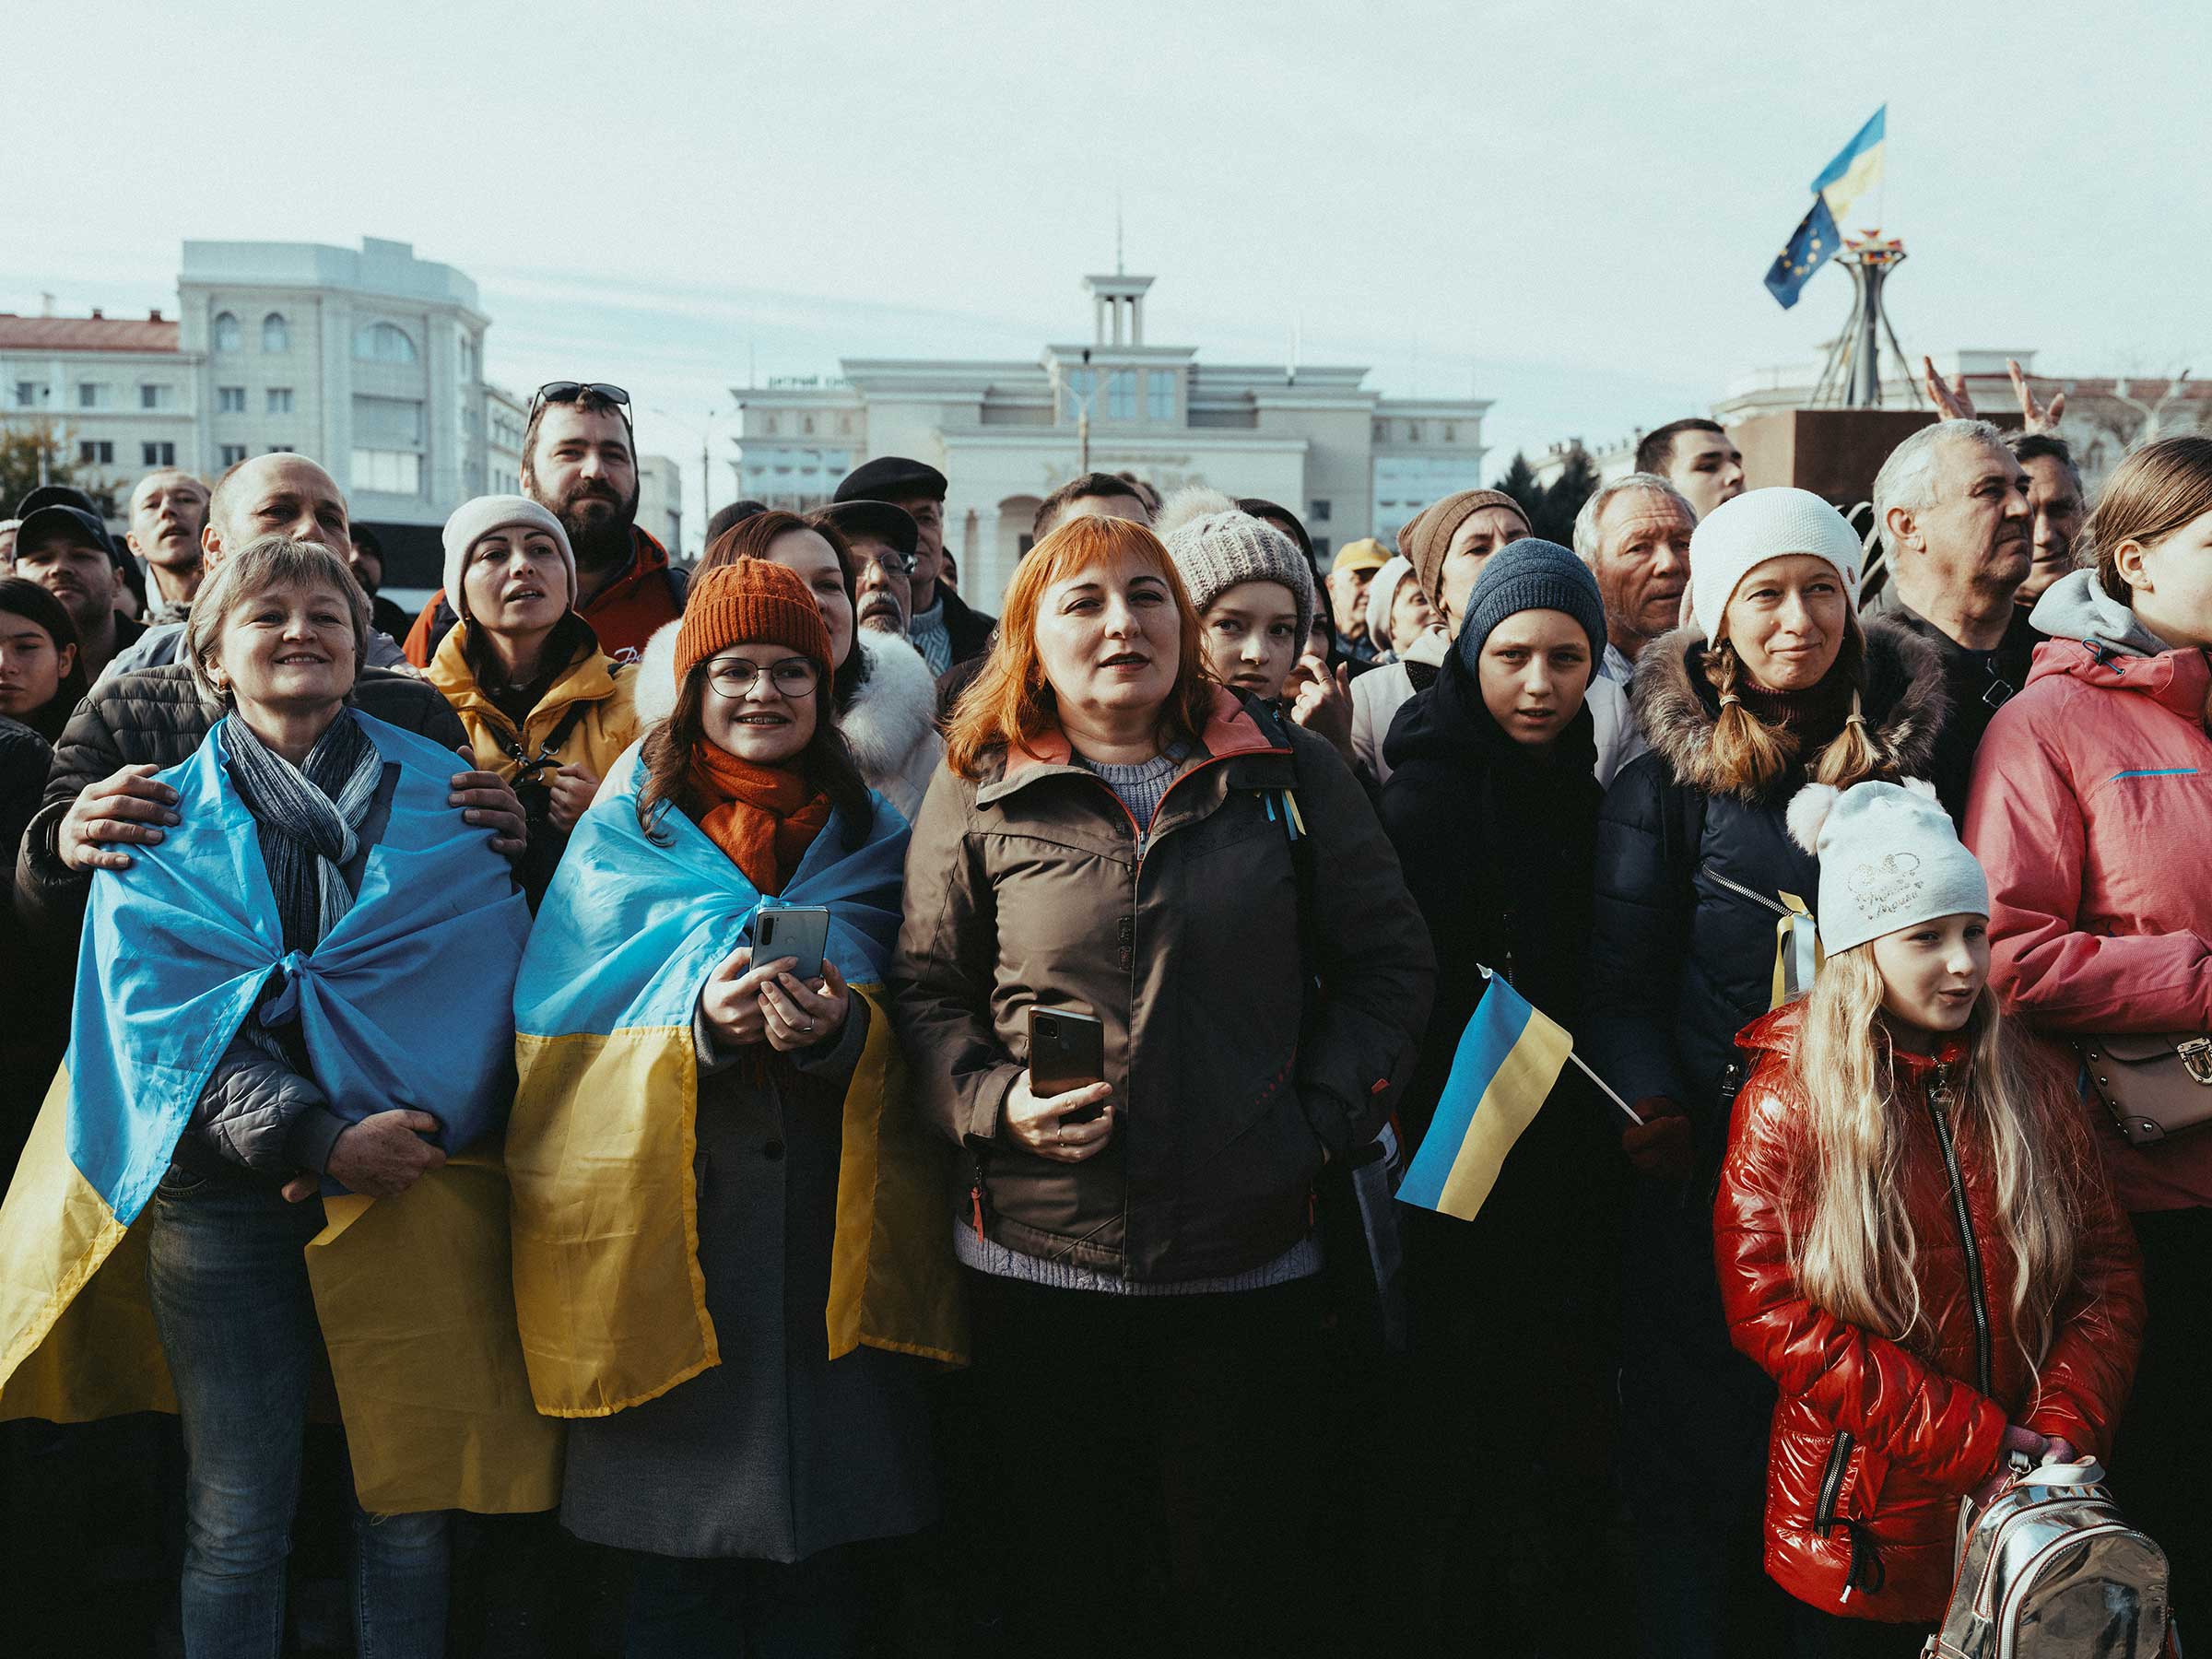 A crowd gathers during Zelensky's visit to the liberated city of Kherson on Nov. 14. (Maxim Dondyuk for TIME)